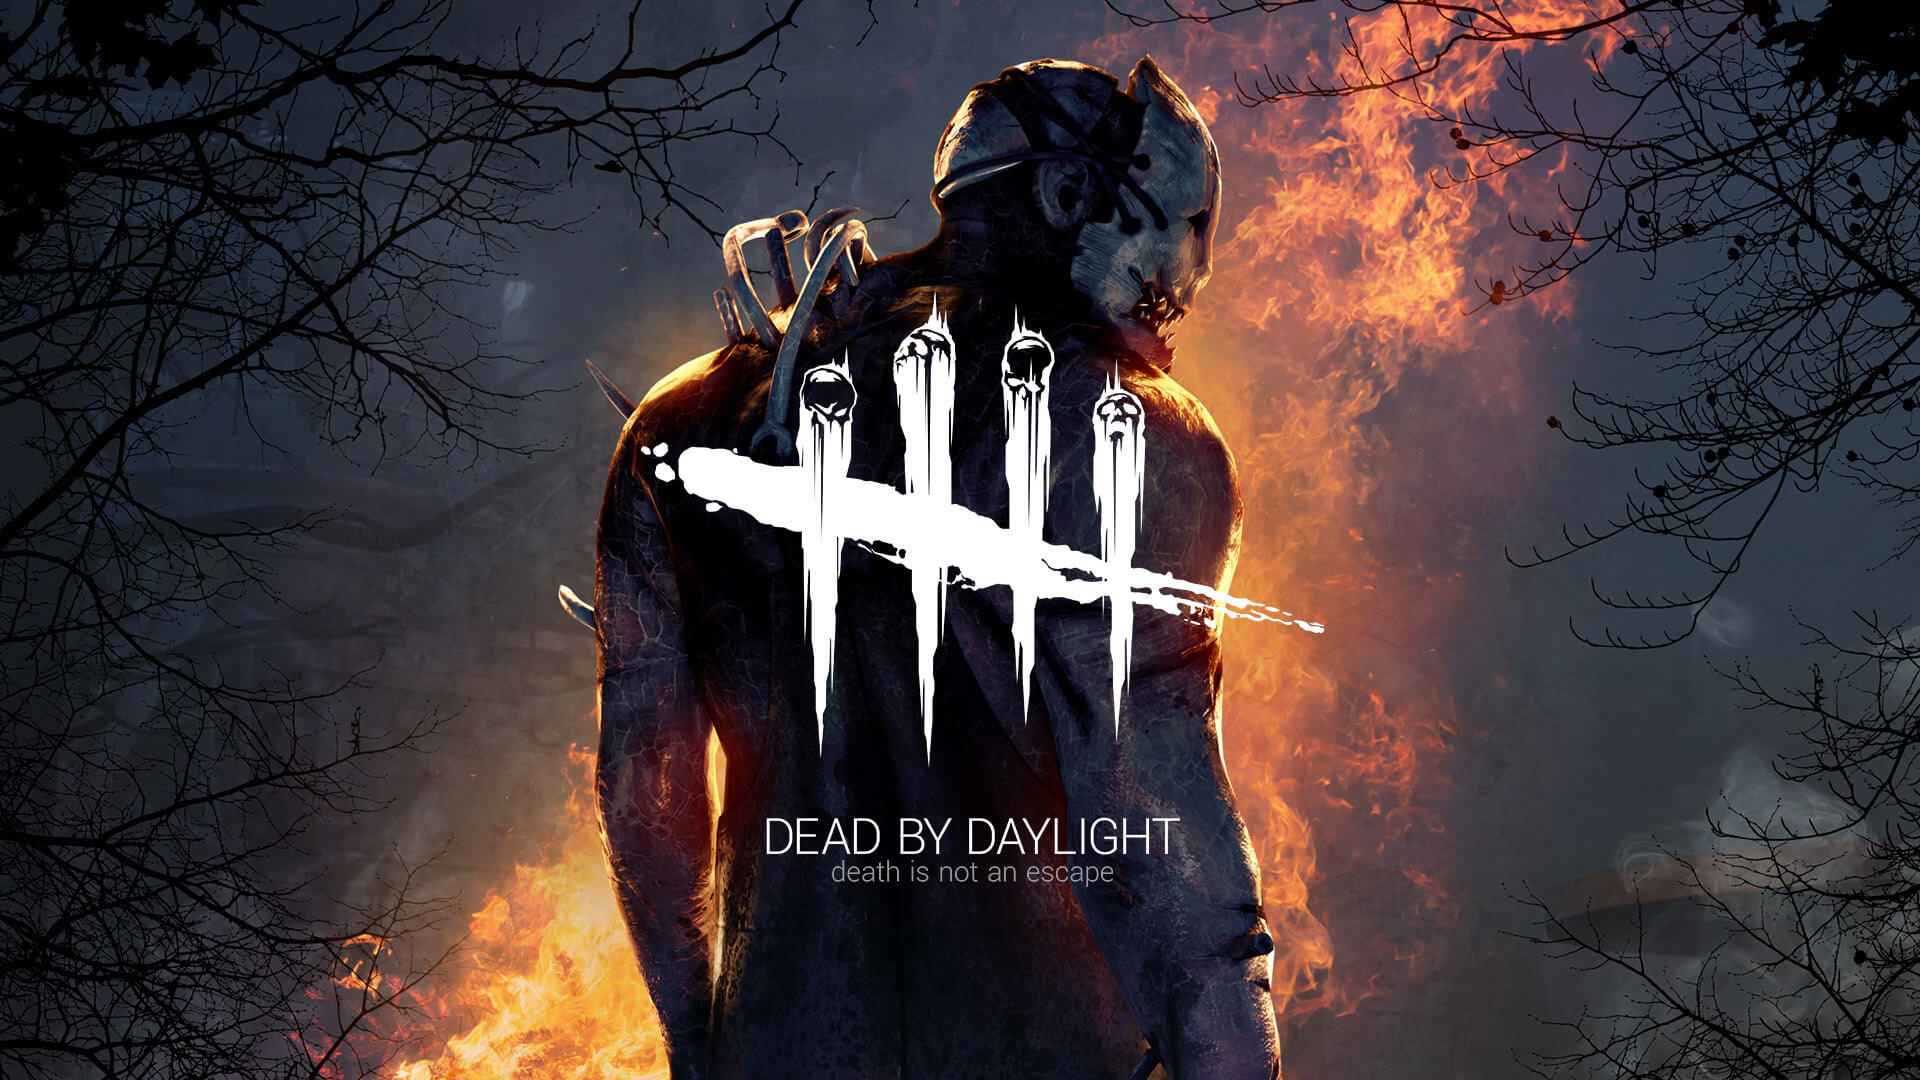 Dead by Daylight Update 1.87 Full Patch Notes 3.6.1 Revealed